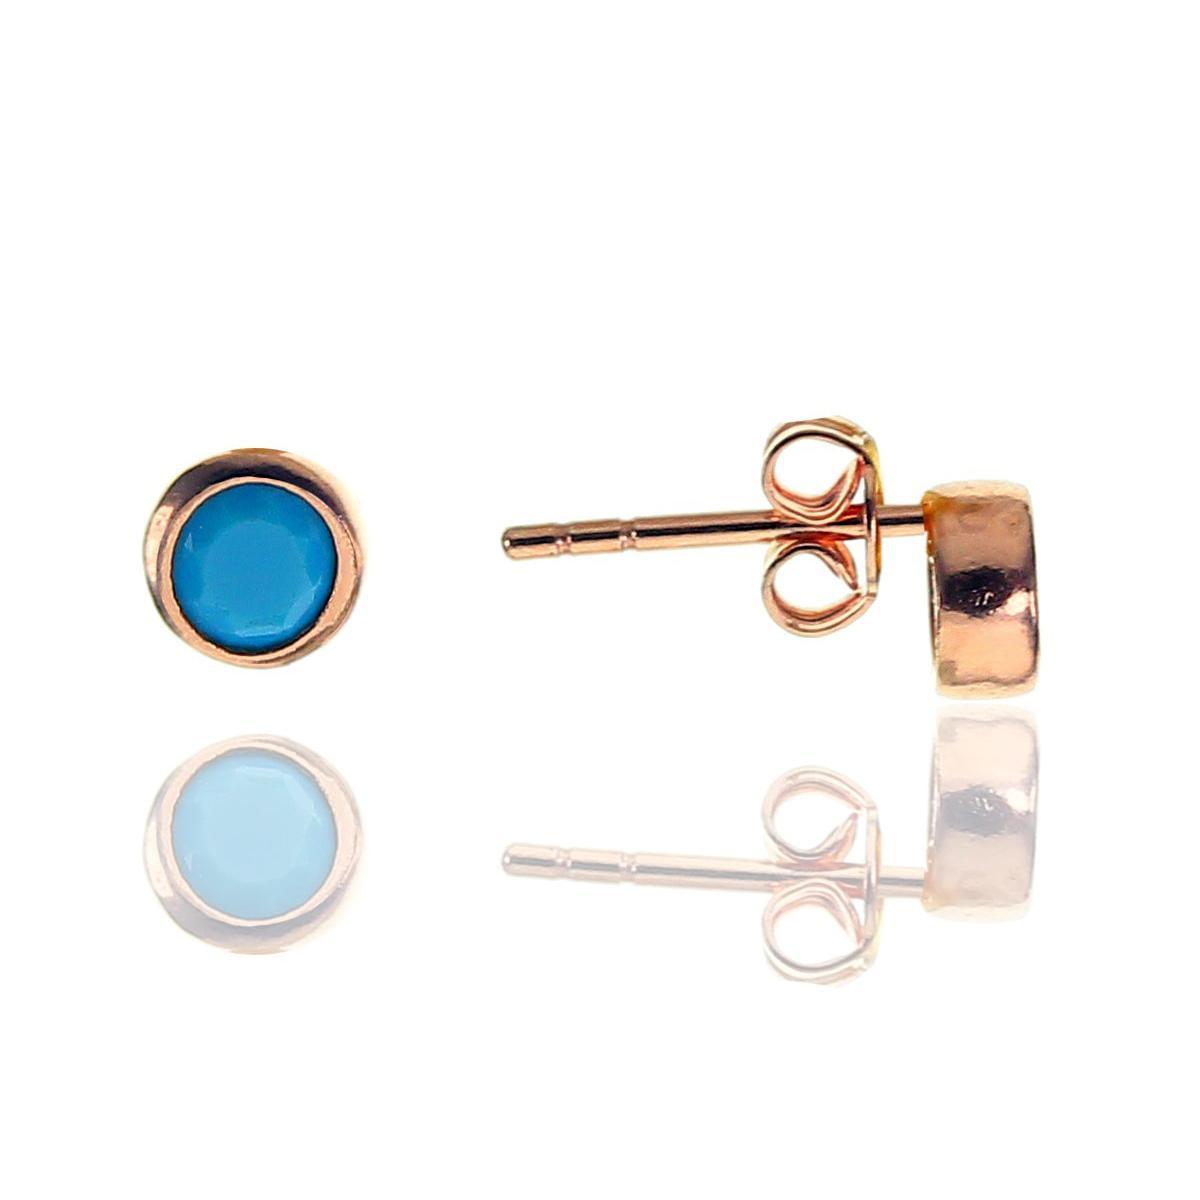 Turquoise Stud Earrings • Blue Sapphire Stud Earrings • Gift For Her - Trending Silver Gifts